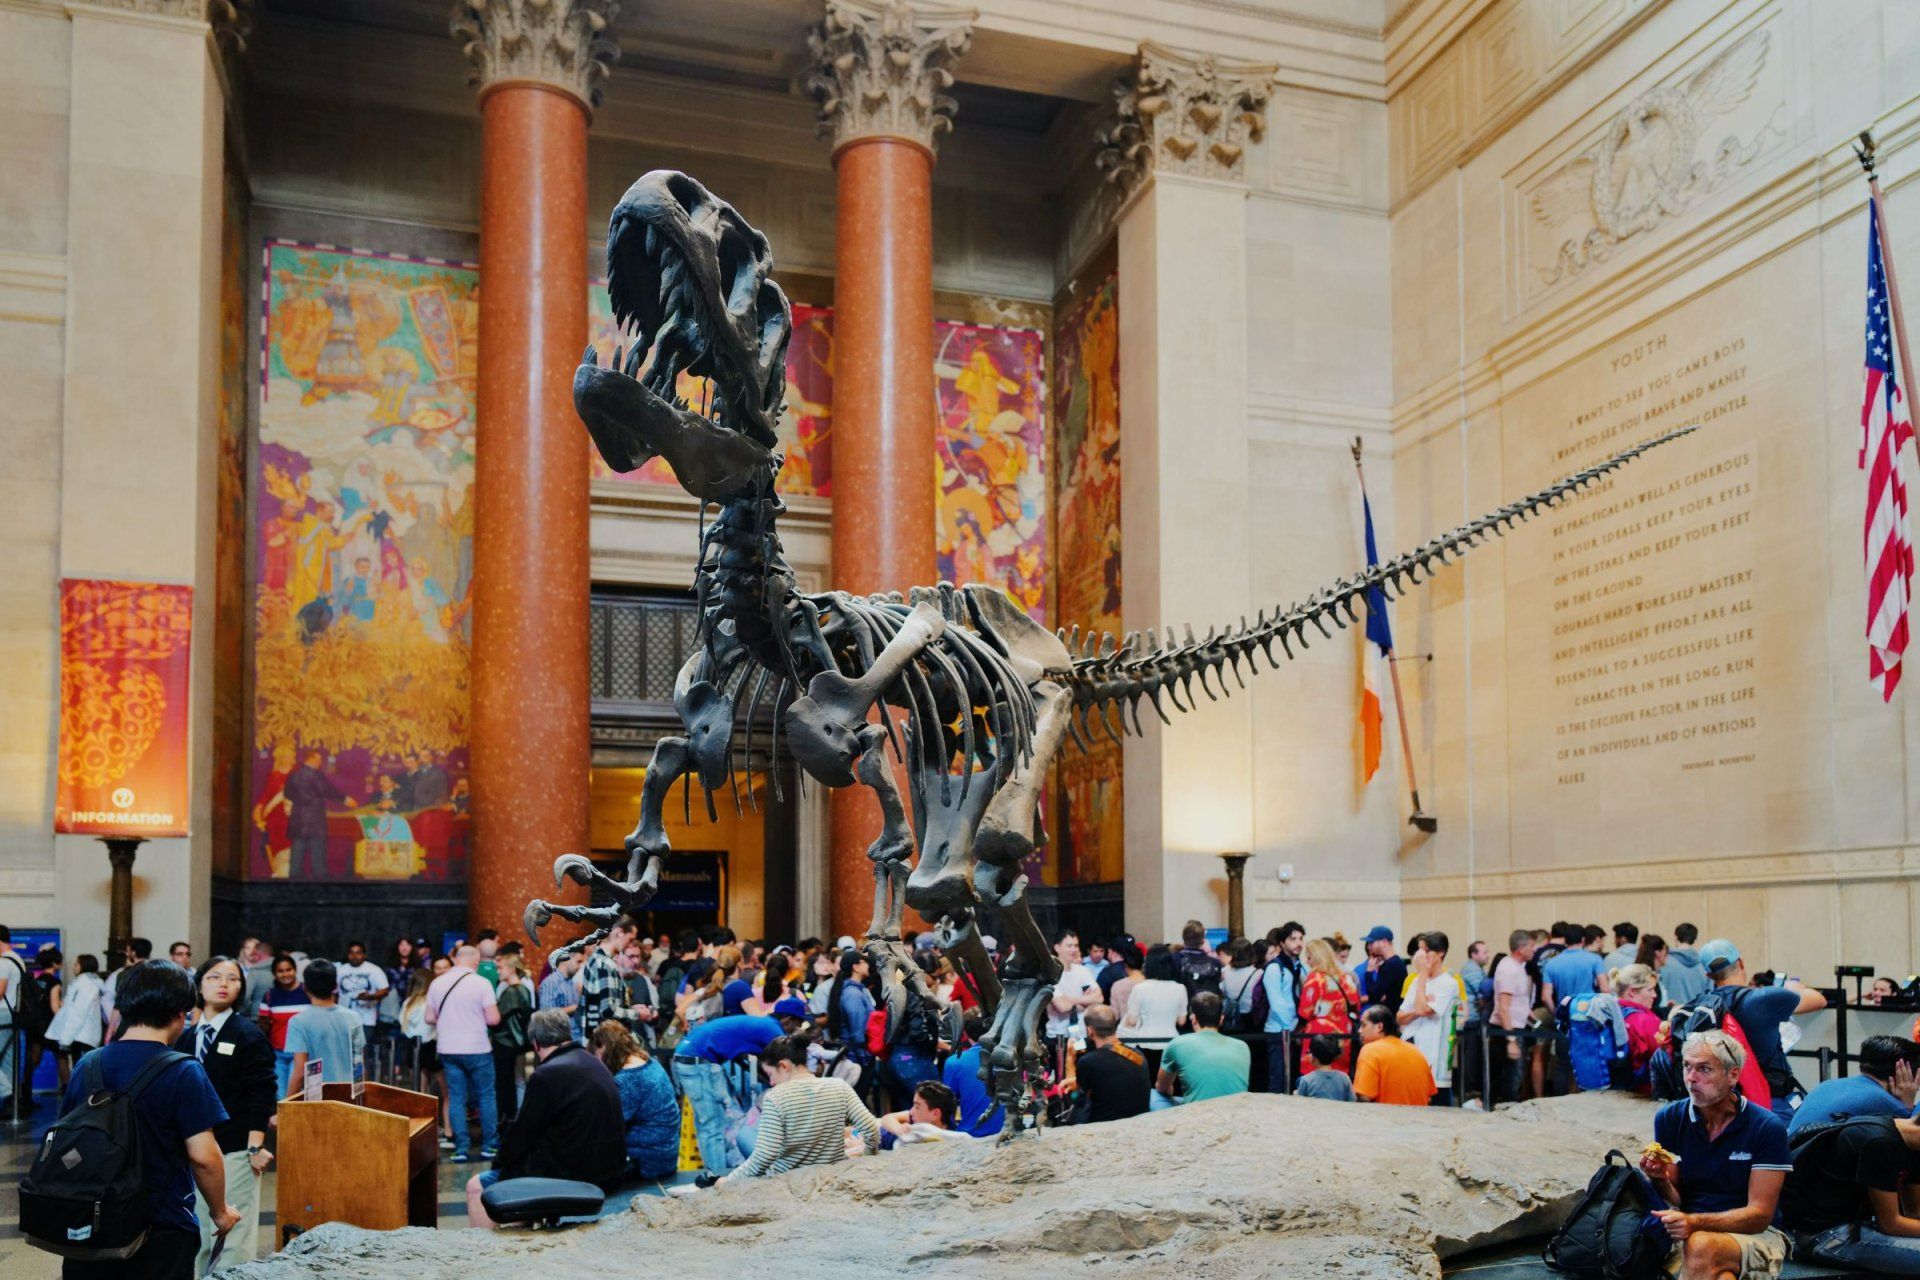 a large dinosaur skeleton is displayed in a museum